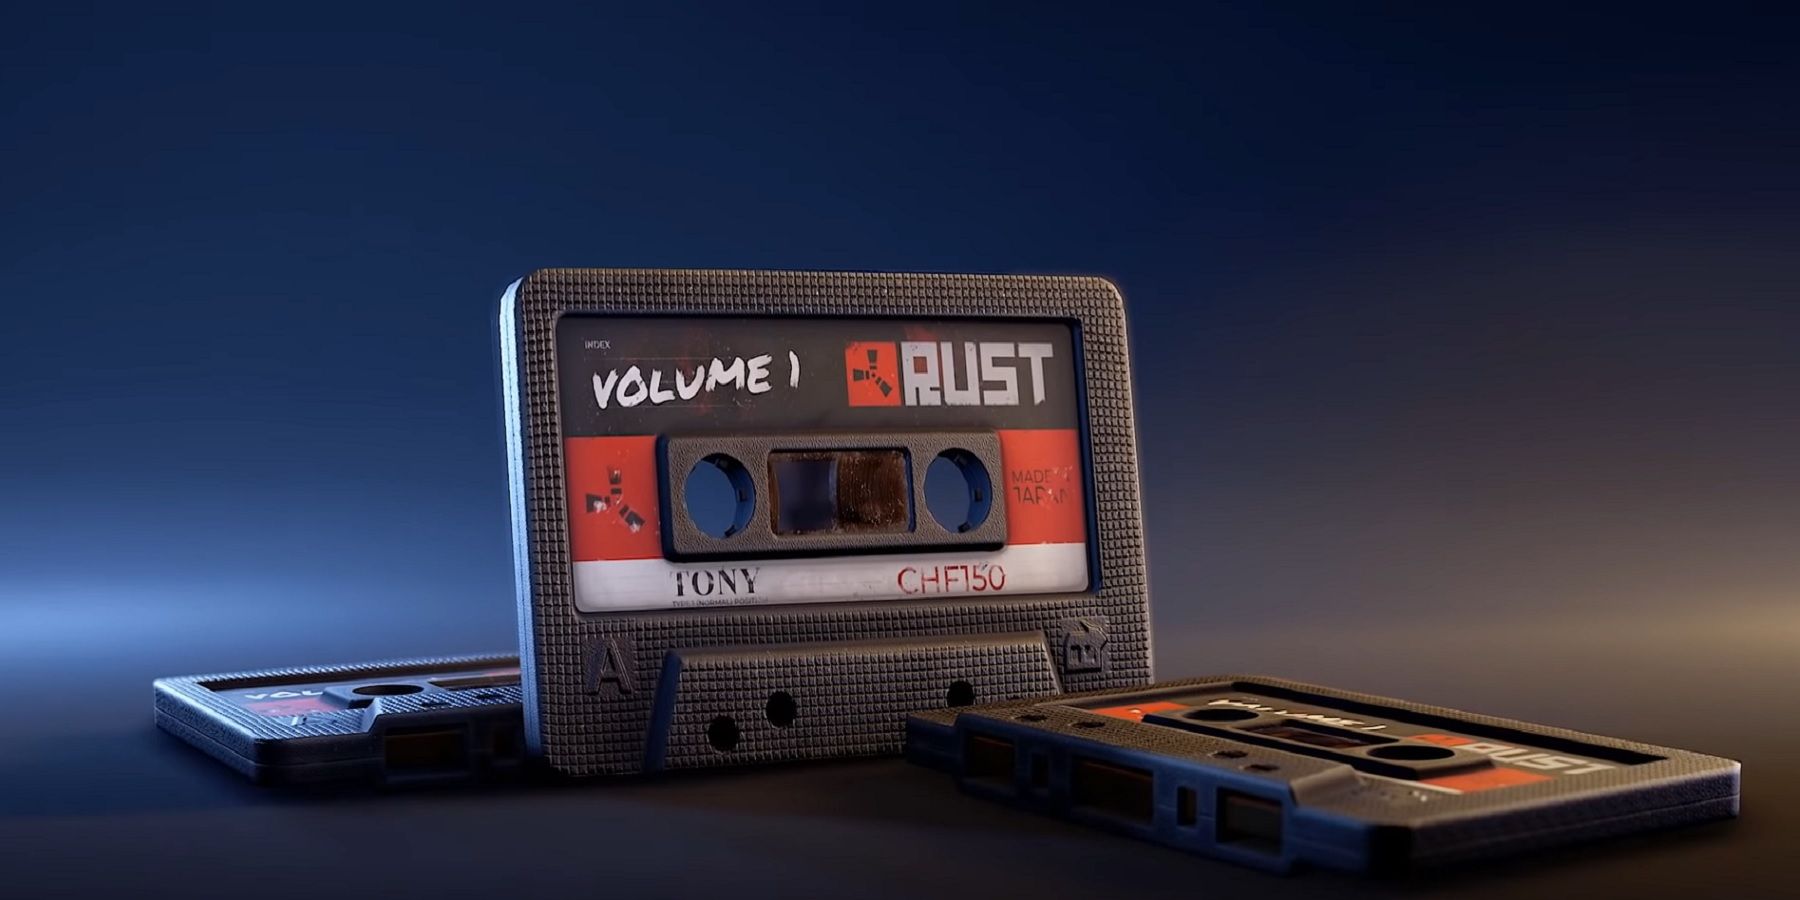 Image from Rust showing a series of cassette tapes that bear the game's logo.